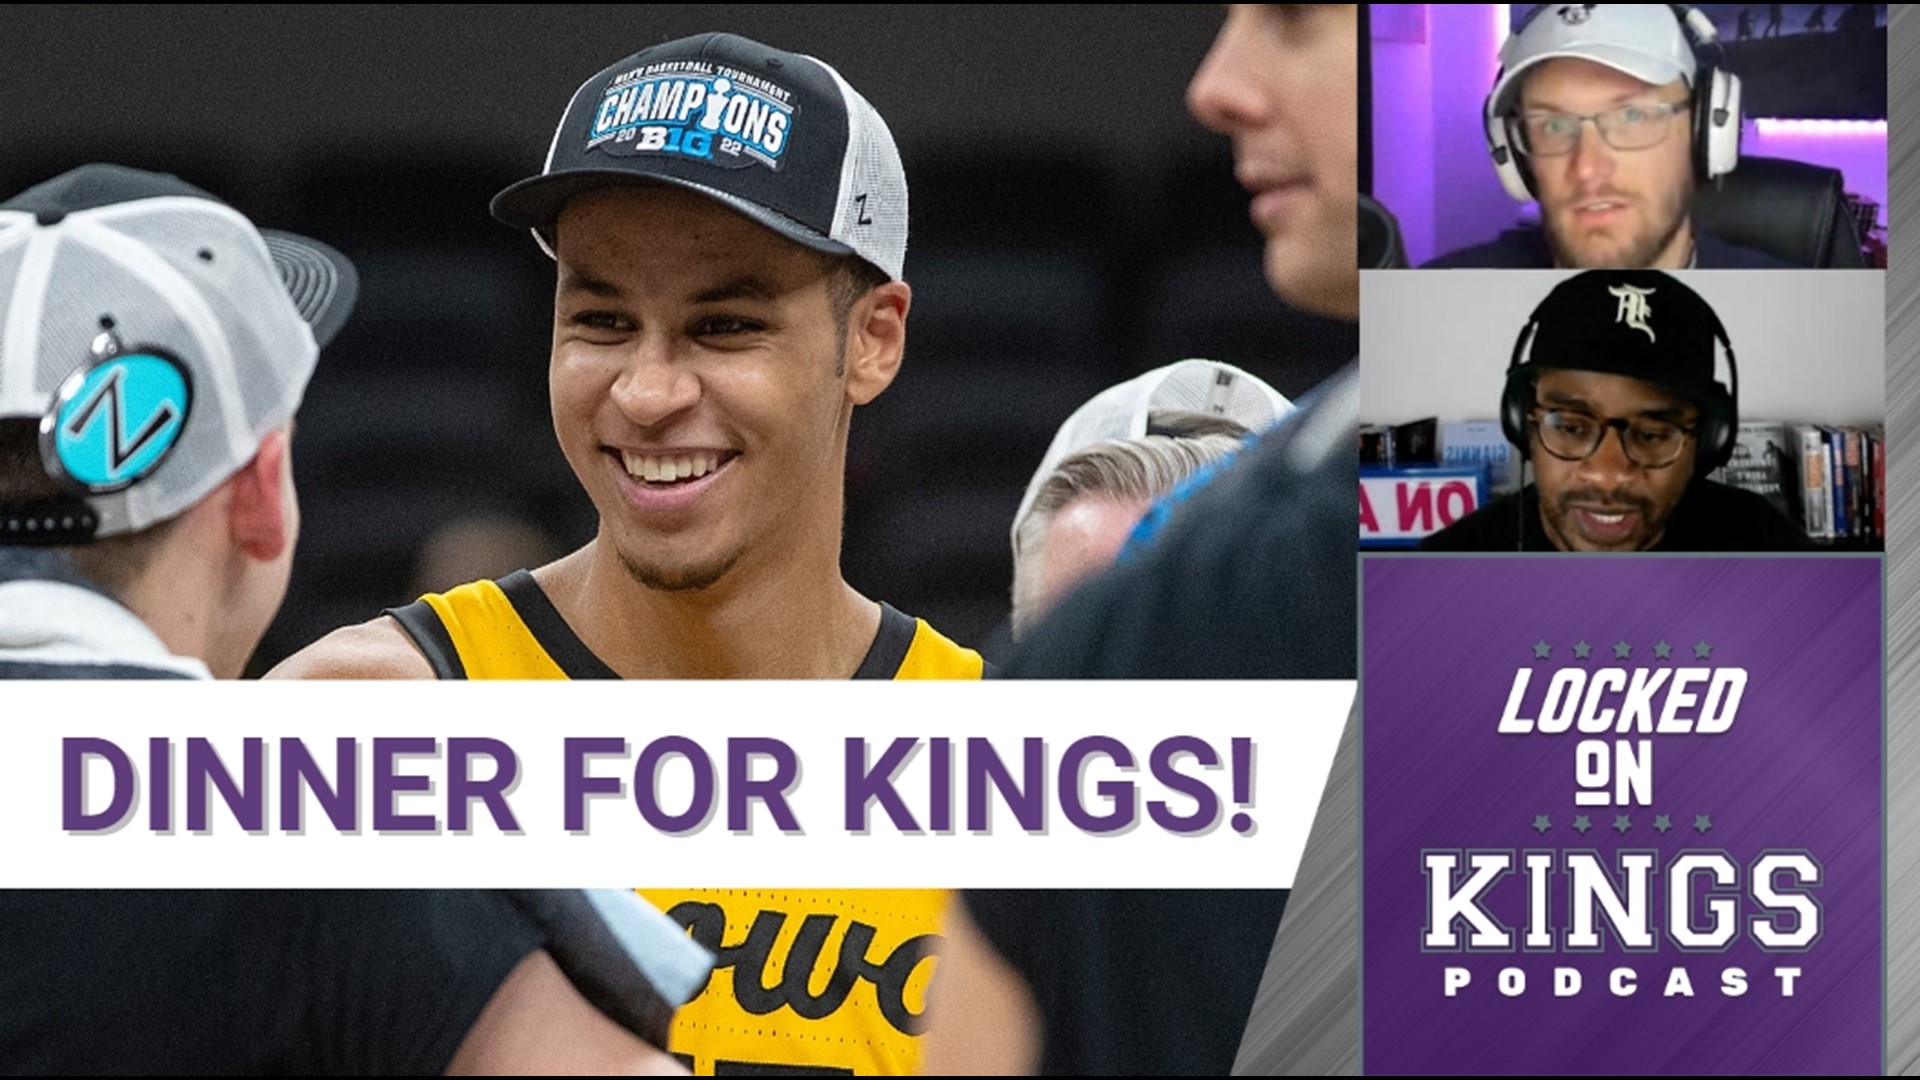 Matt George discusses the latest on the Sacramento Kings' interest in Keegan Murray, Jaden Ivey's comments on not meeting with the Kings, and talks 2nd round of the